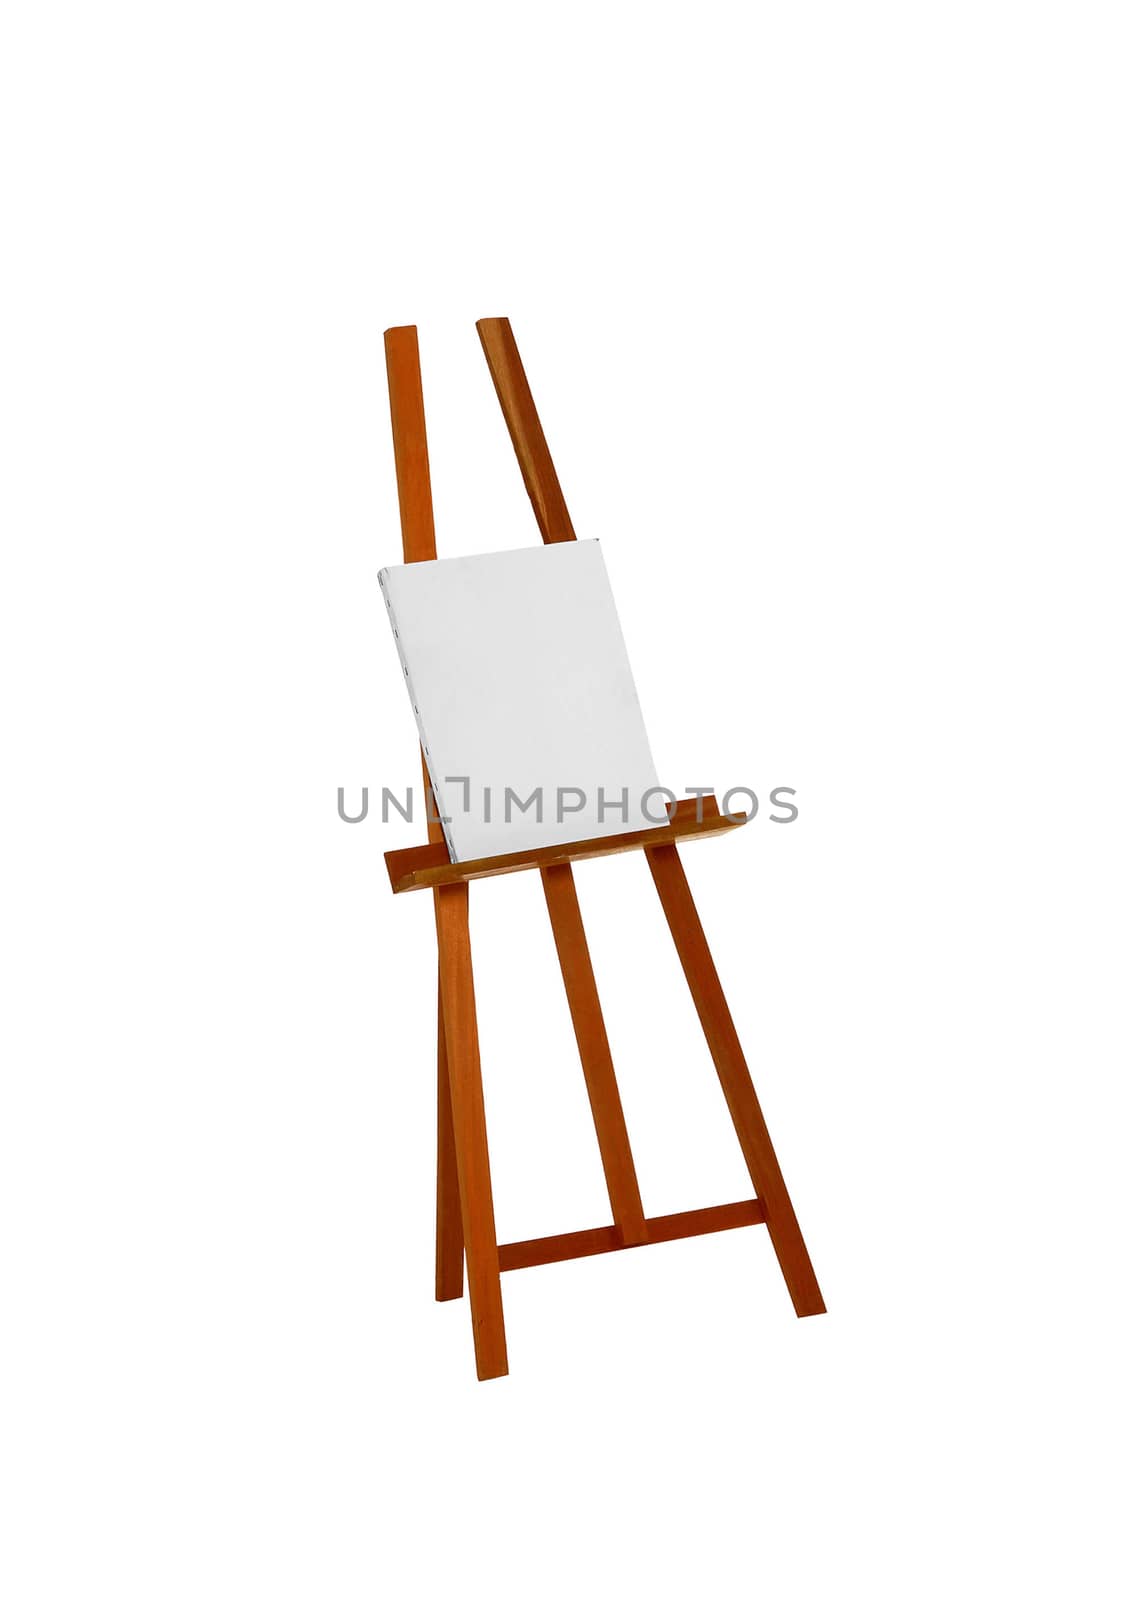 Easel isolated on white